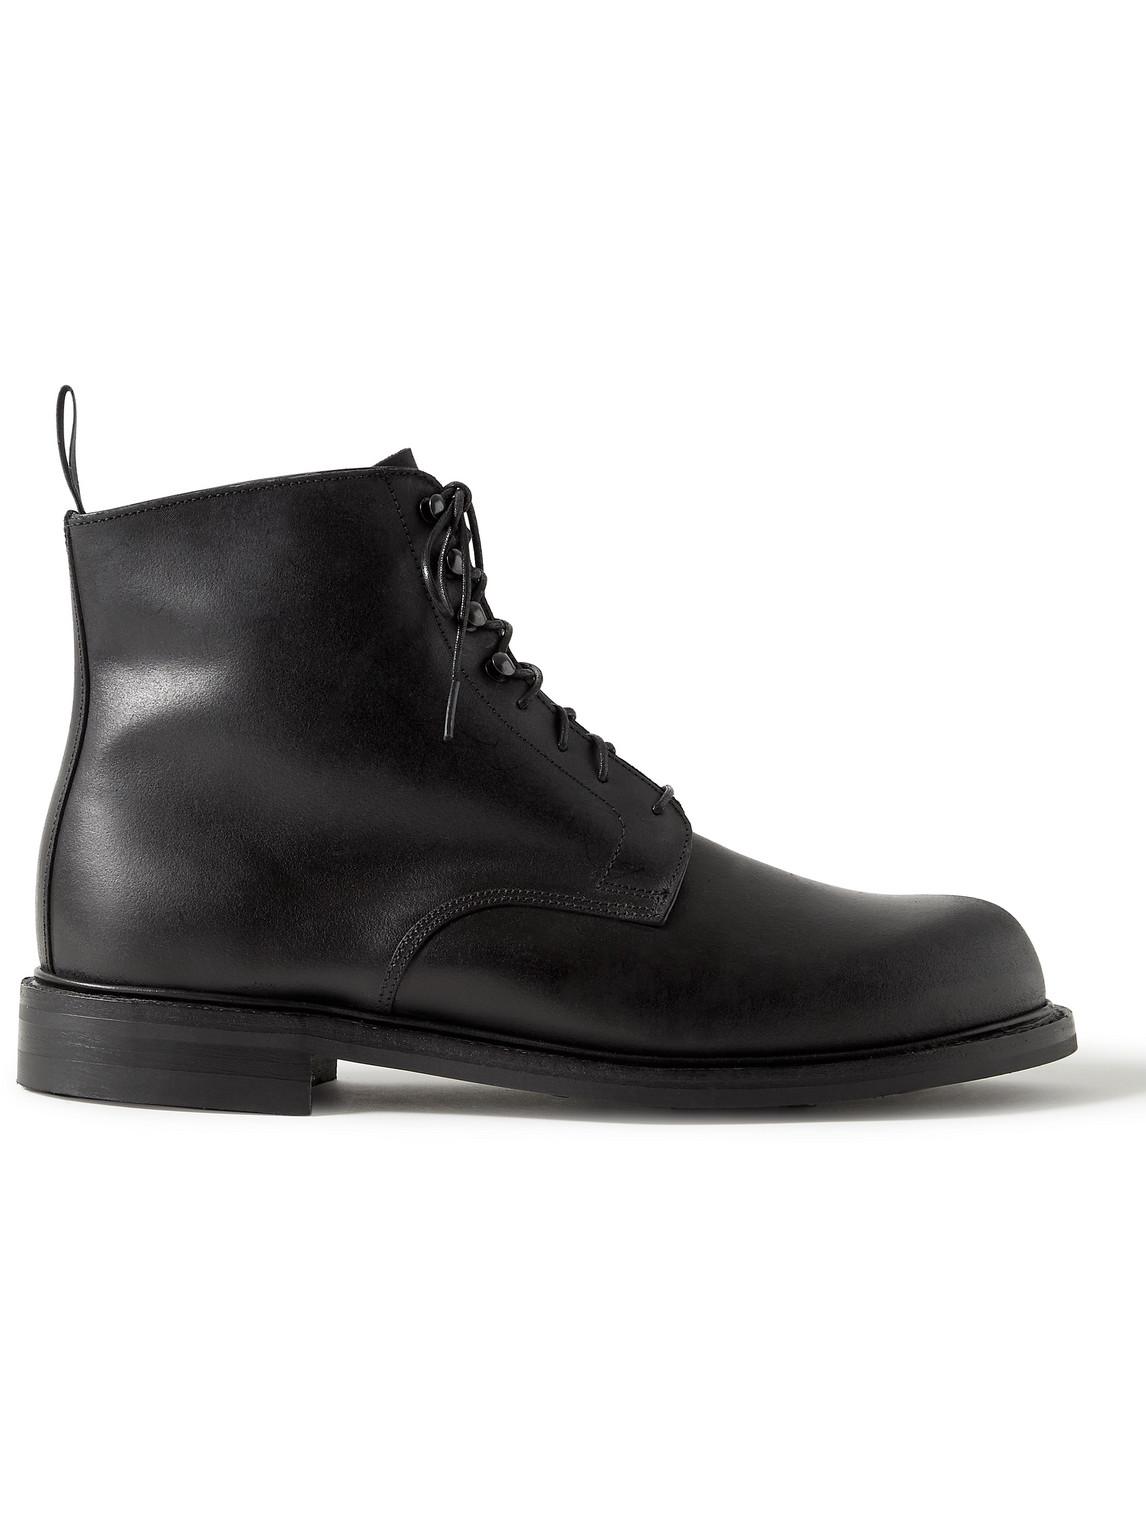 George Cleverley Taron 2 Leather Boots in Black for Men | Lyst